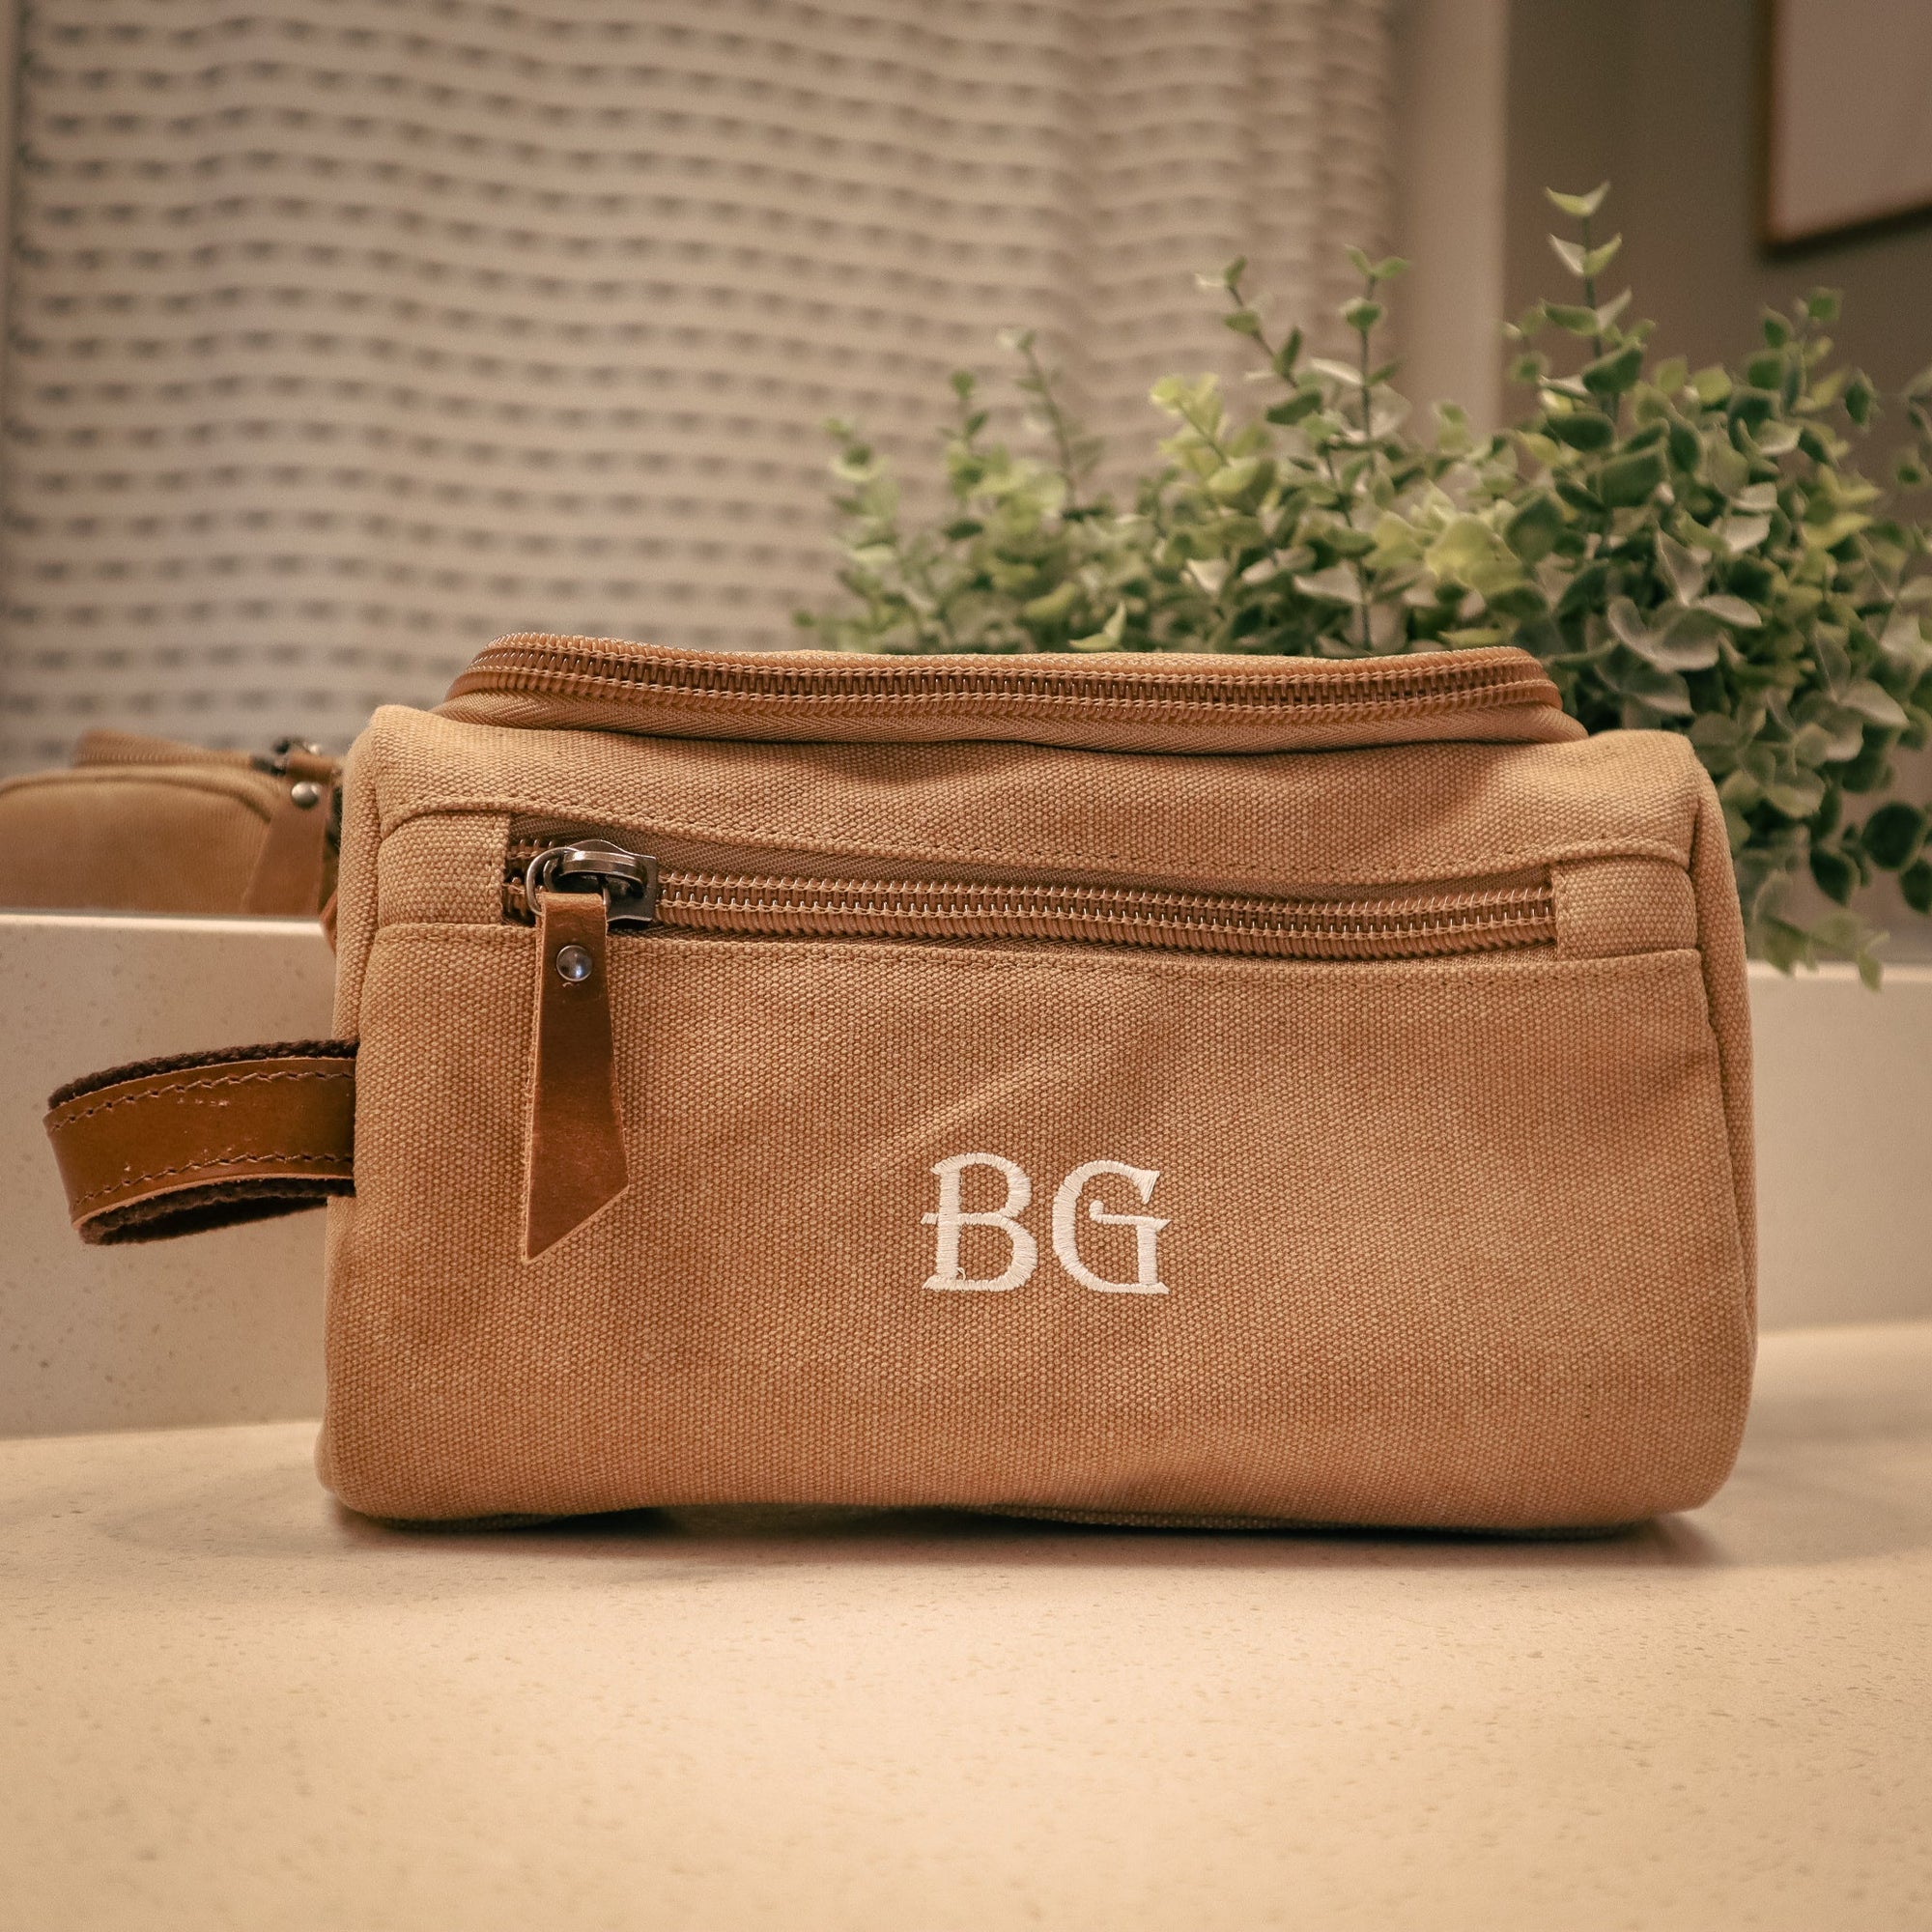 Monogrammed Toiletry Bag for Men - Canvas with Leather Straps